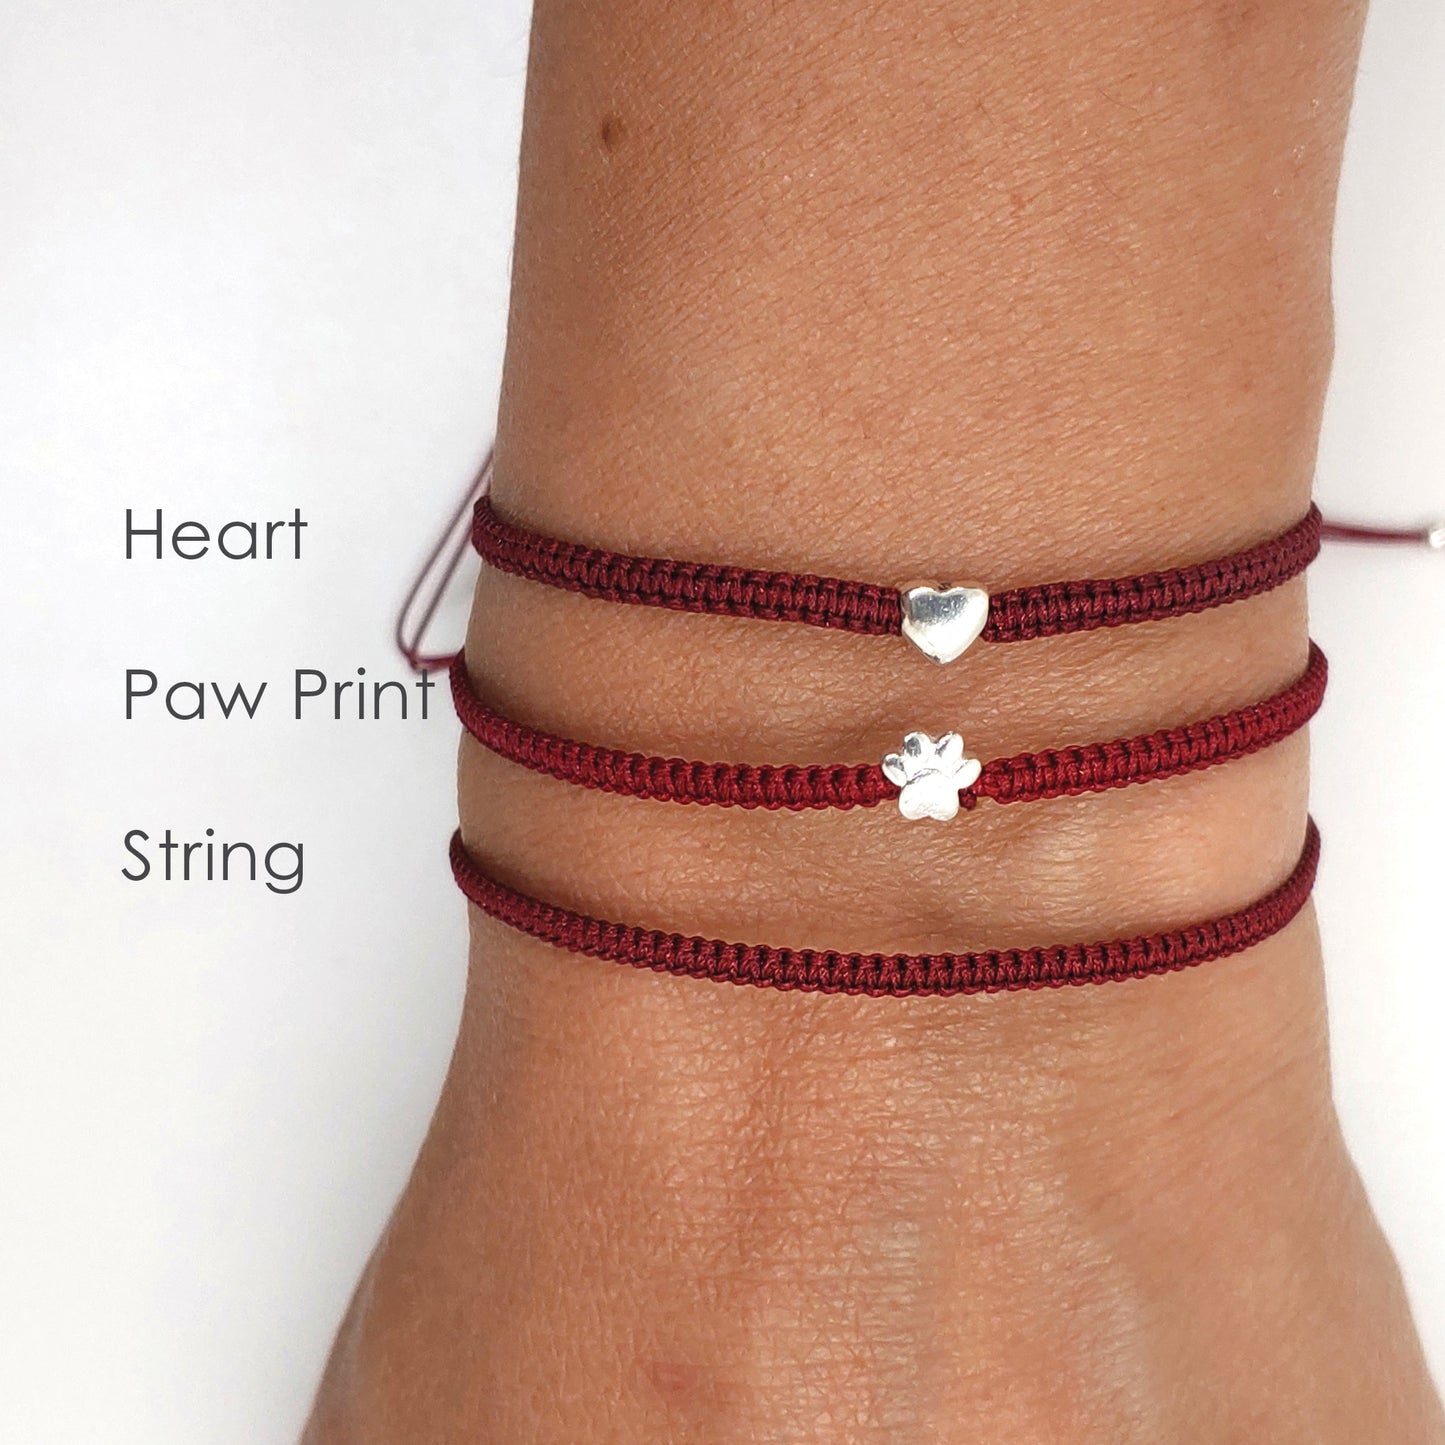 Red String Of Fate Bracelet (two bracelets) – Notoriousunlimited™